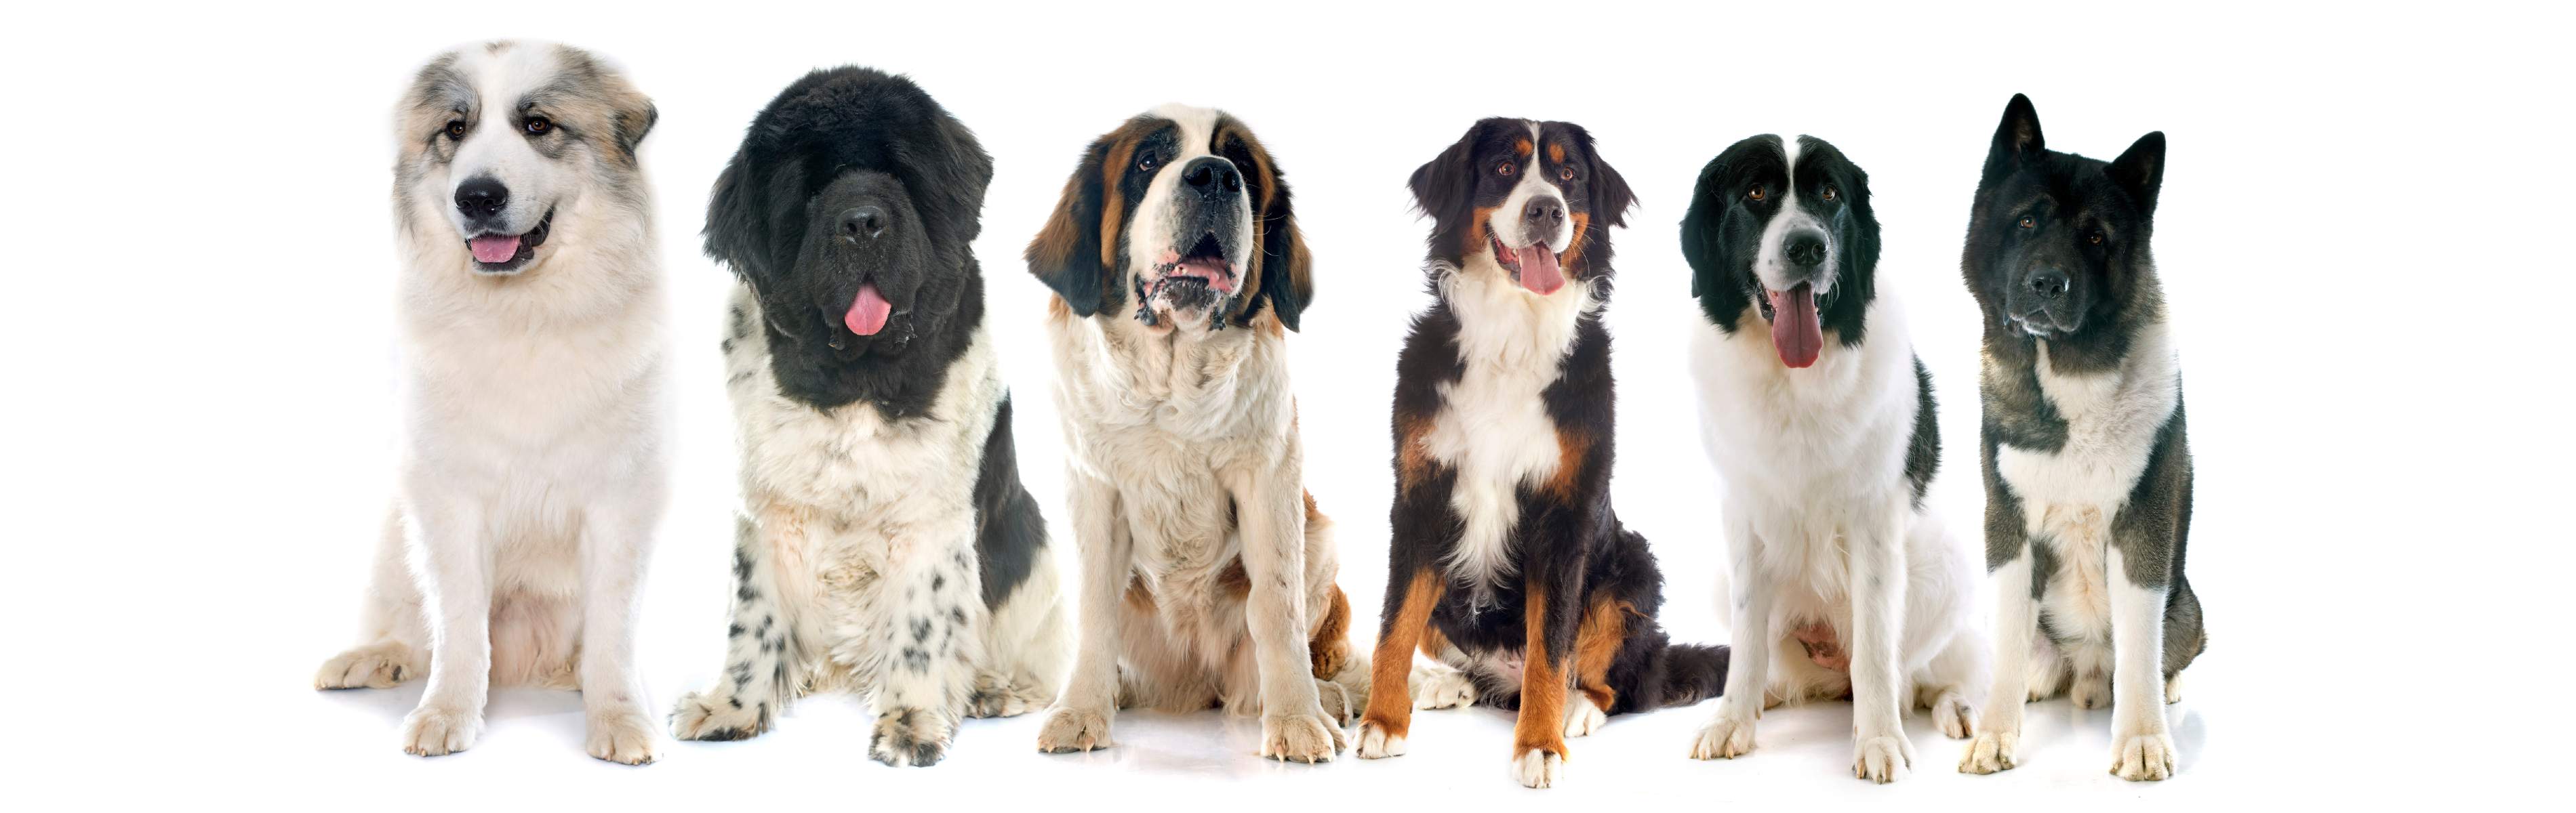 A line-up of obedient dogs trained by Dog Training Elite - contact boxborough for expert dog training today!